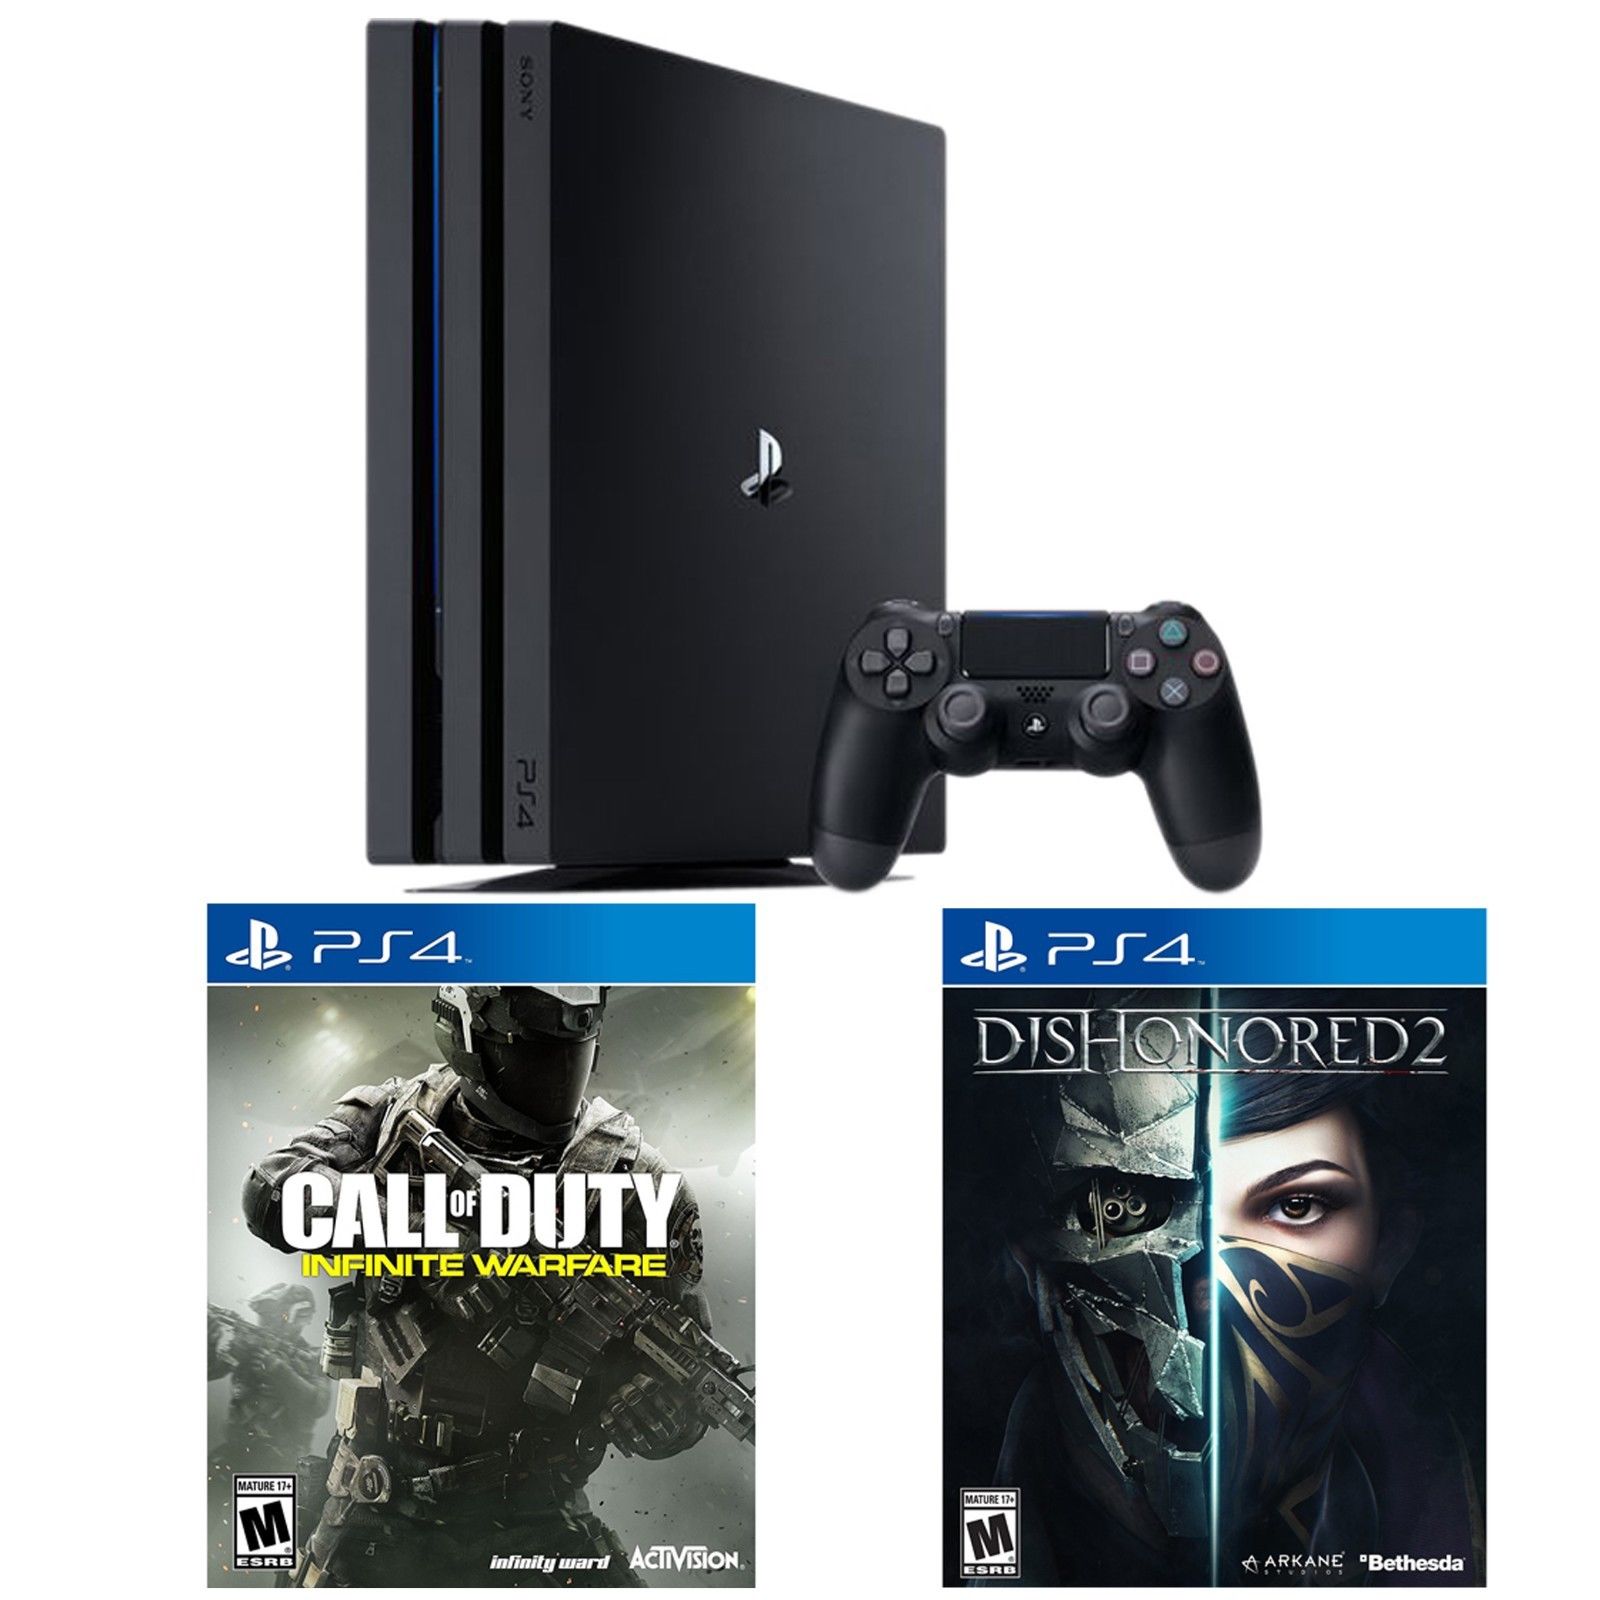 Image for Get a PS4 Pro with Call of Duty: Infinite Warfare and Dishonored 2 for $400